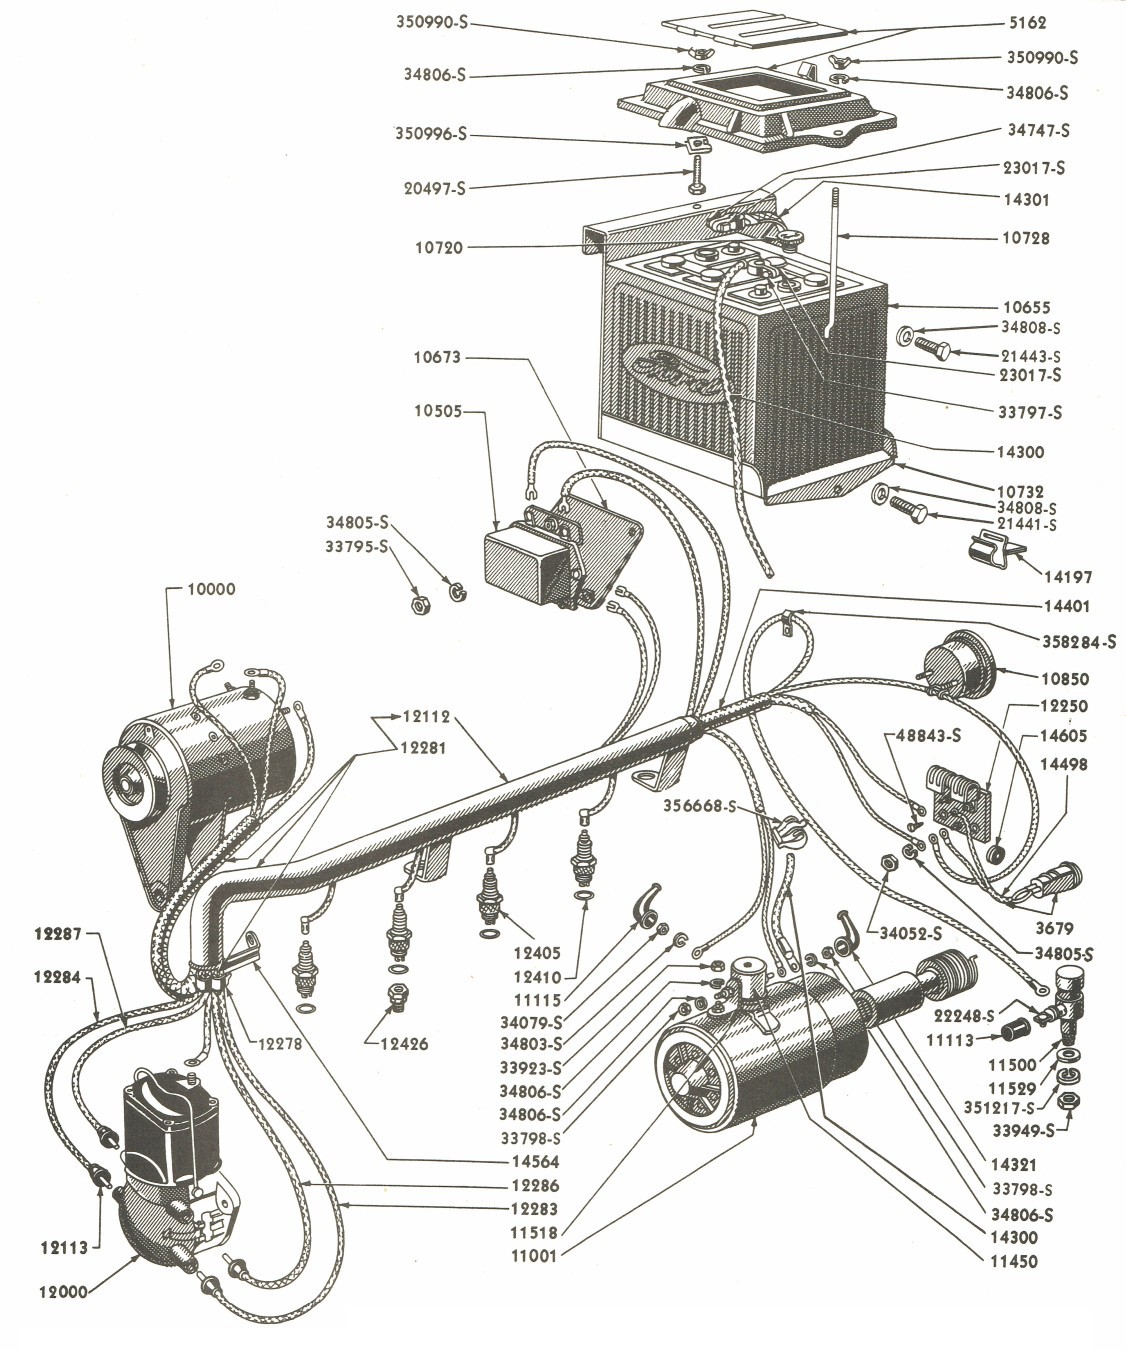 8N Ford Tractor Wiring Diagram 6 Volt from mainetreasurechest.com